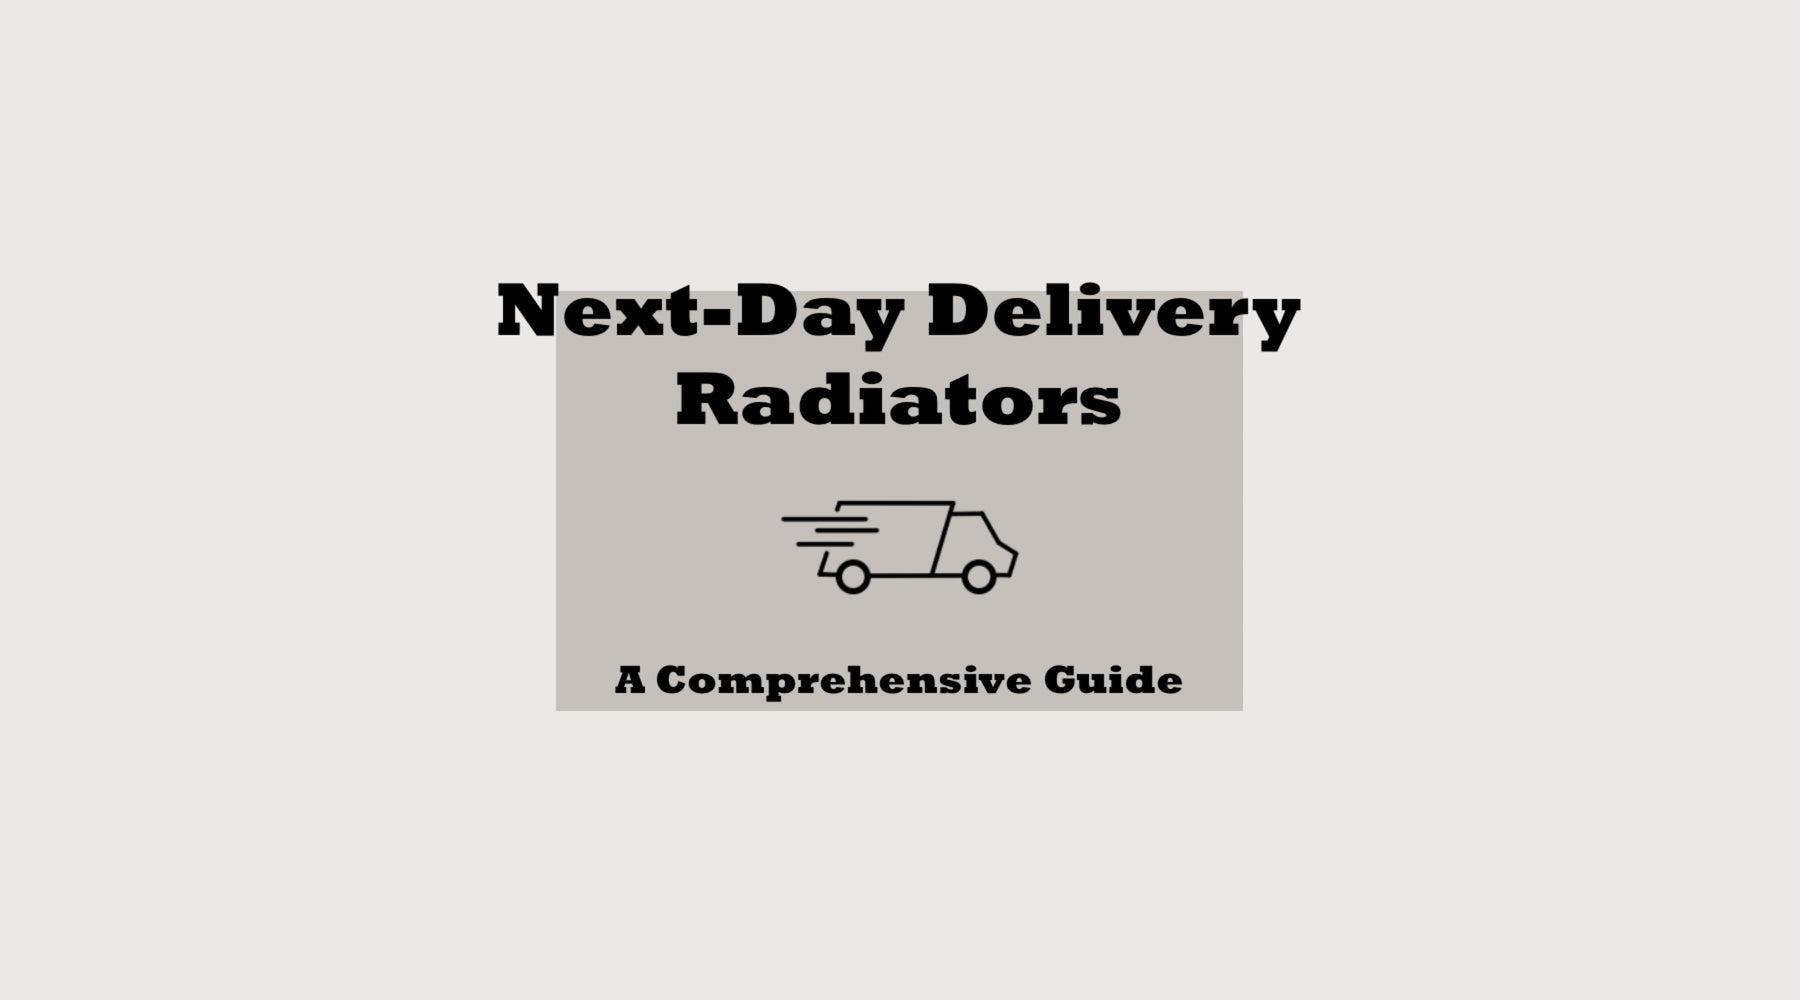 Next-Day Delivery Radiators, A Comprehensive Guide